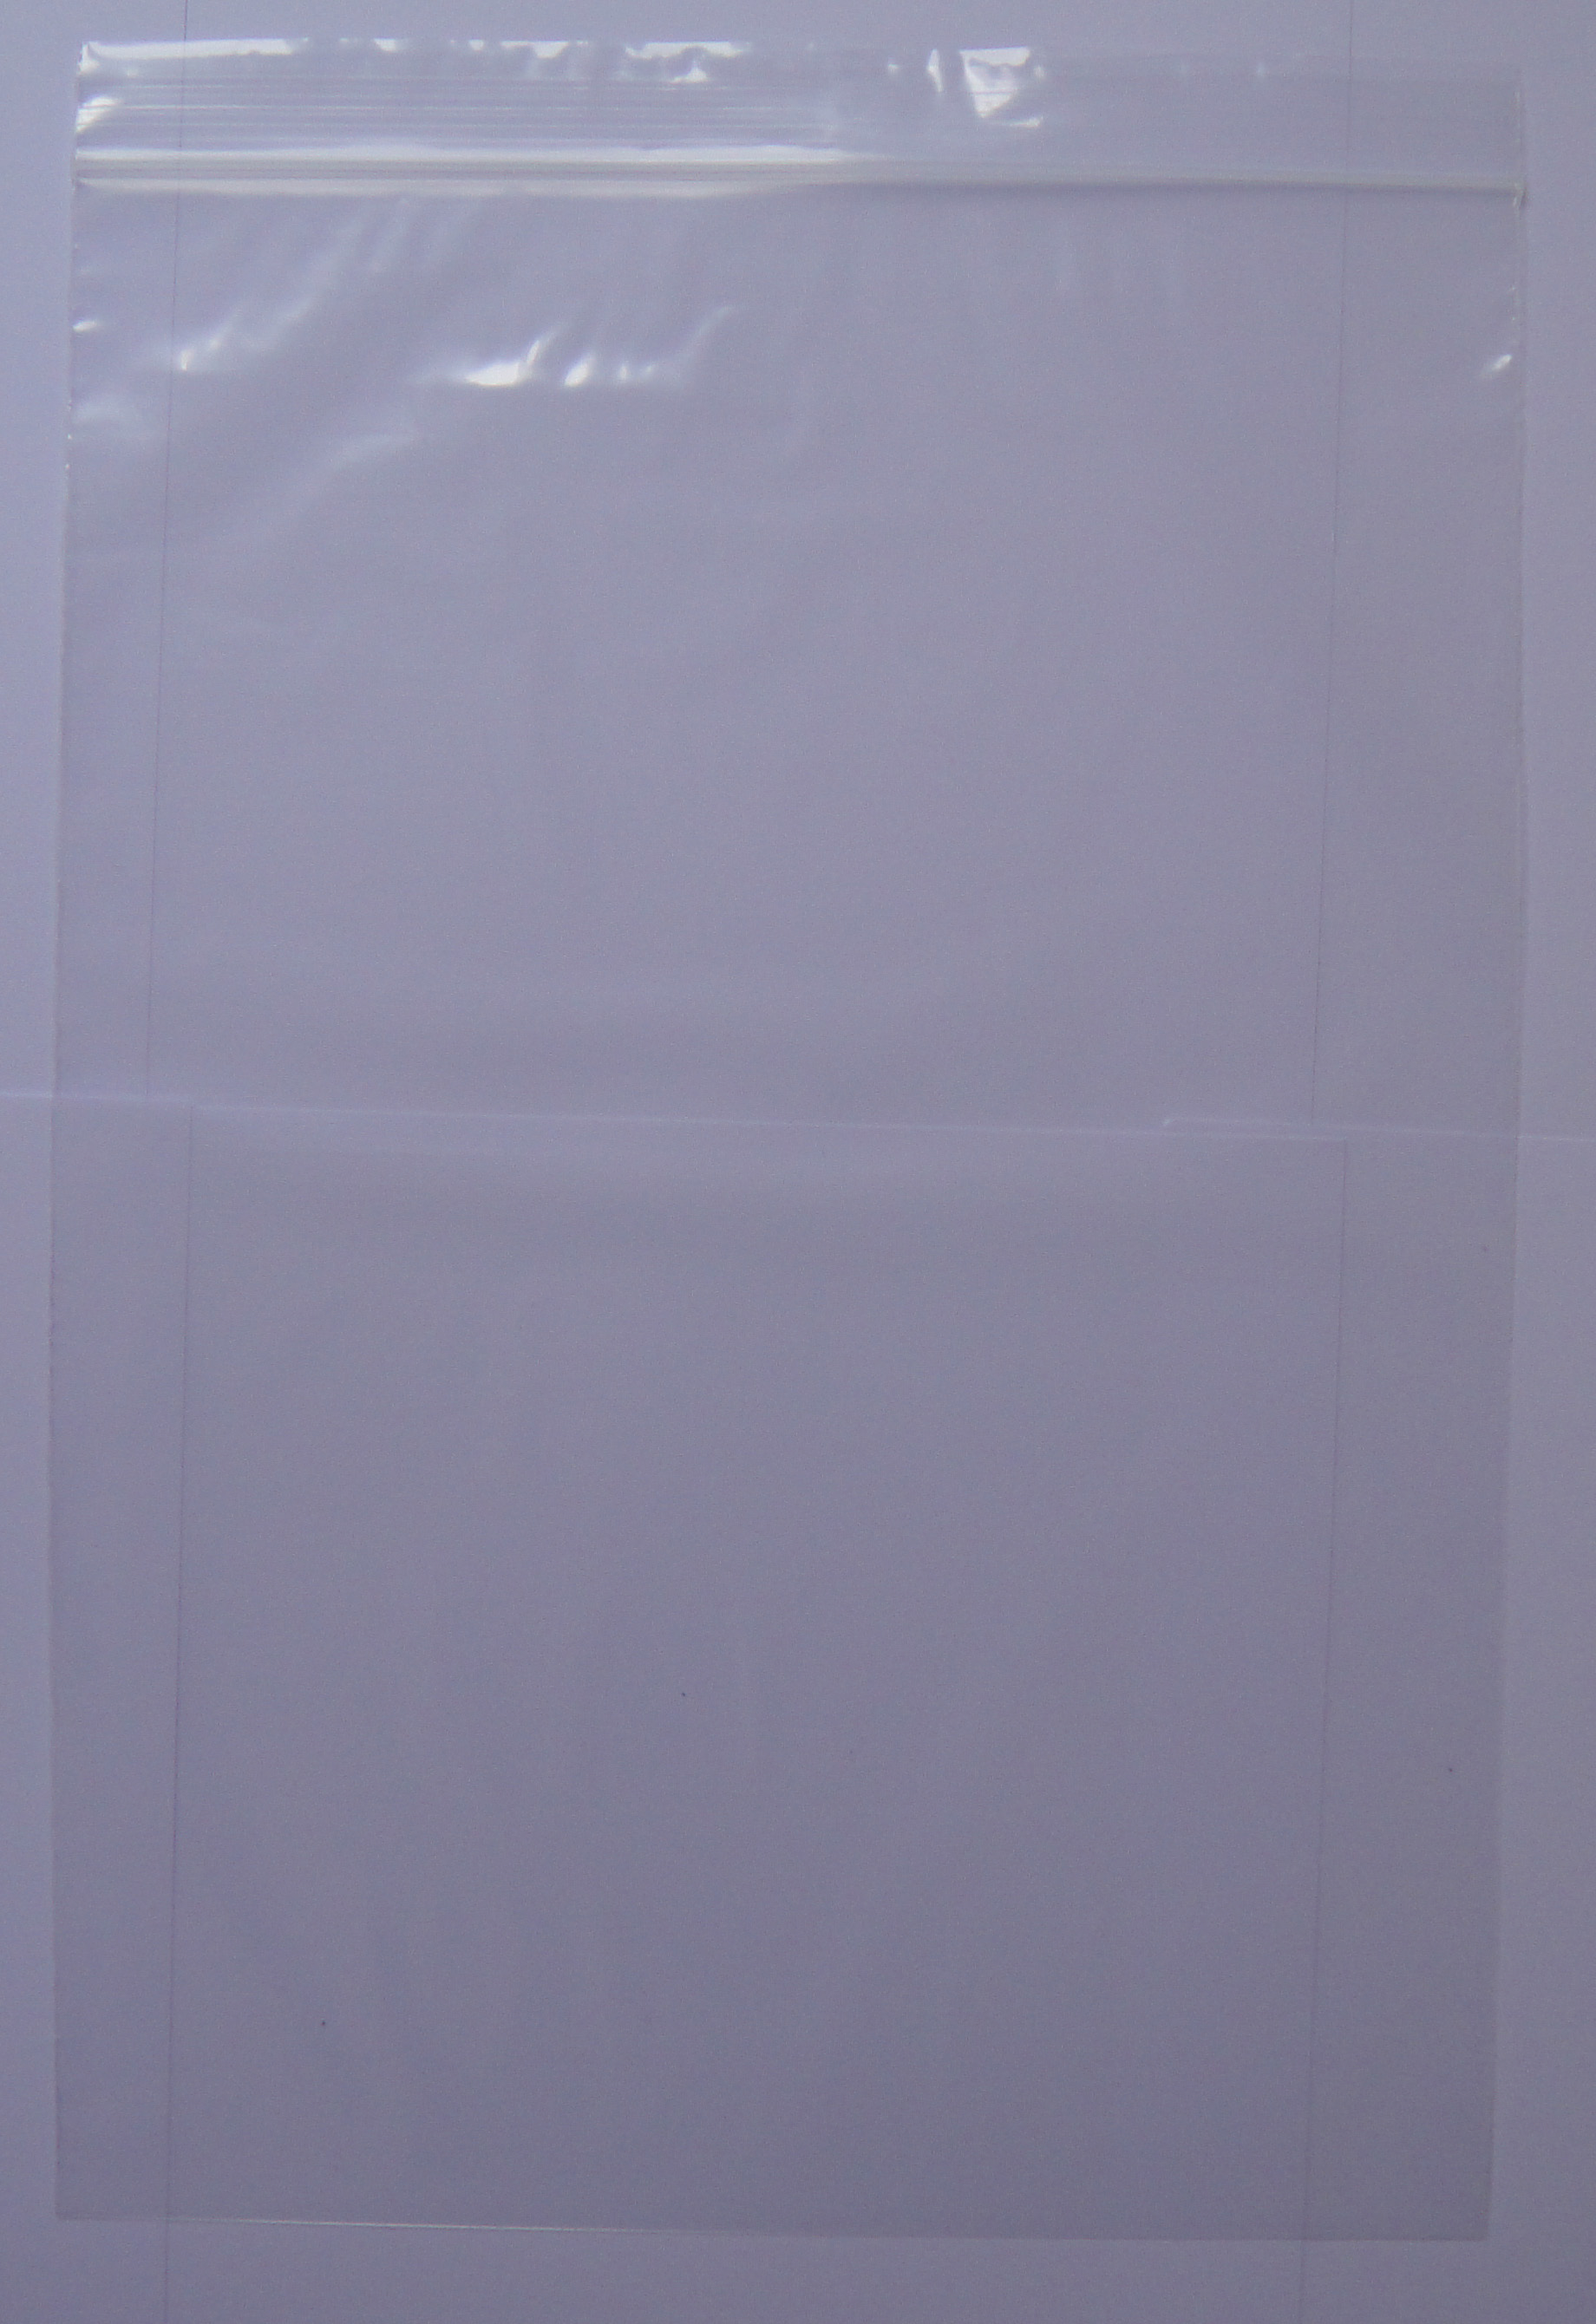 GRIP SEAL BAGS Zip Self Resealable Clear Polythene Poly Plastic Pouche 1.5"x2.5" 